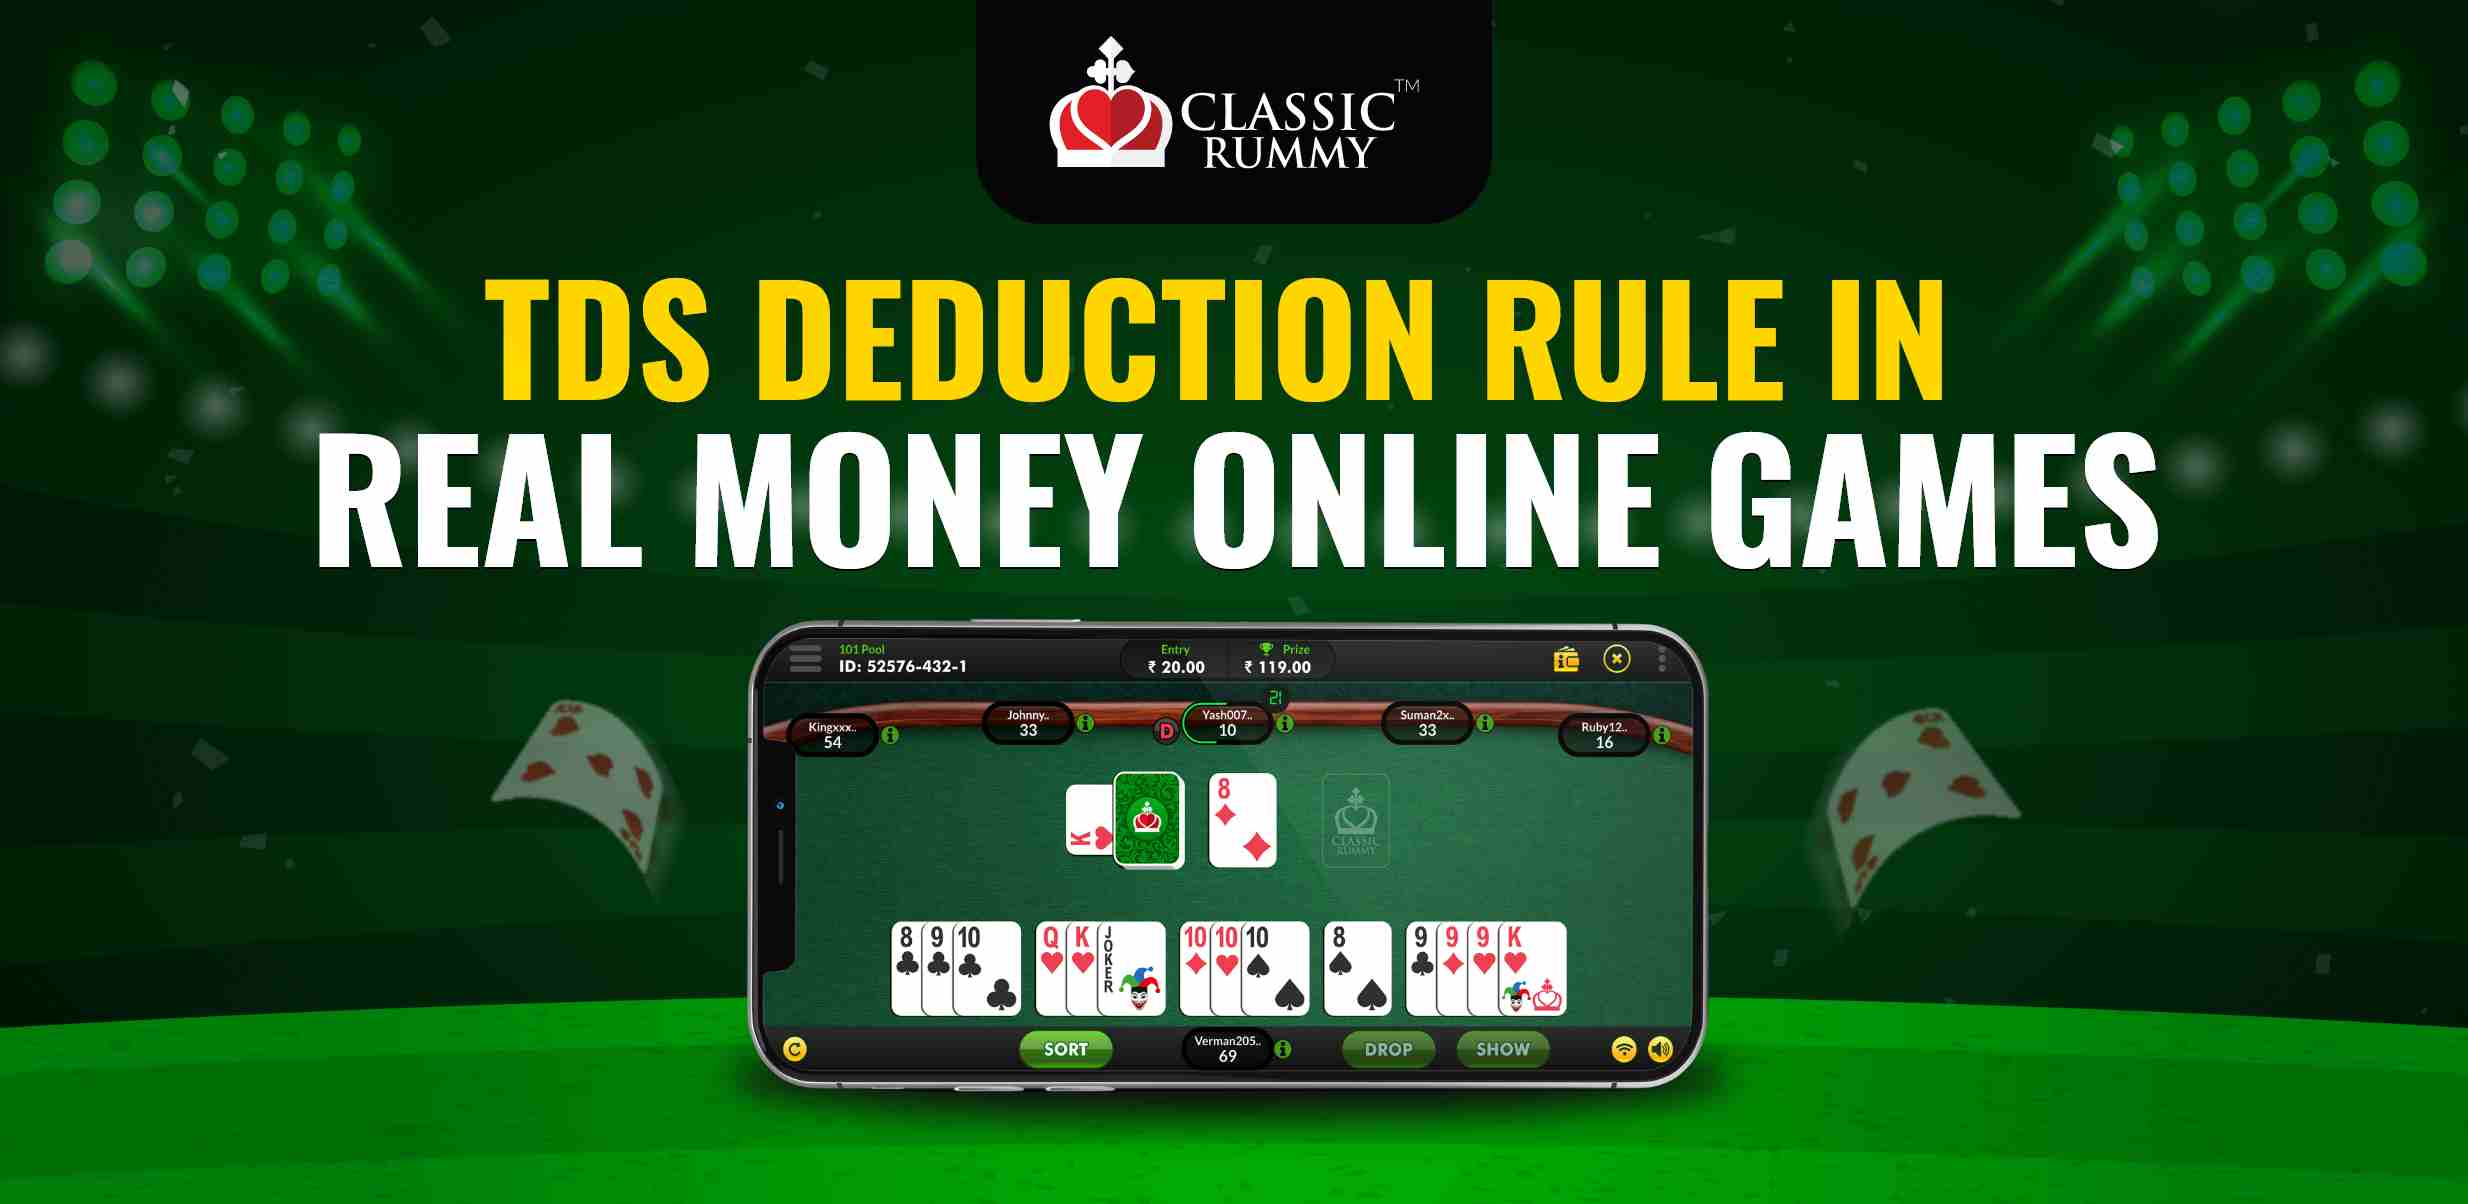 TDS Deduction Rule in Real Money Online Games